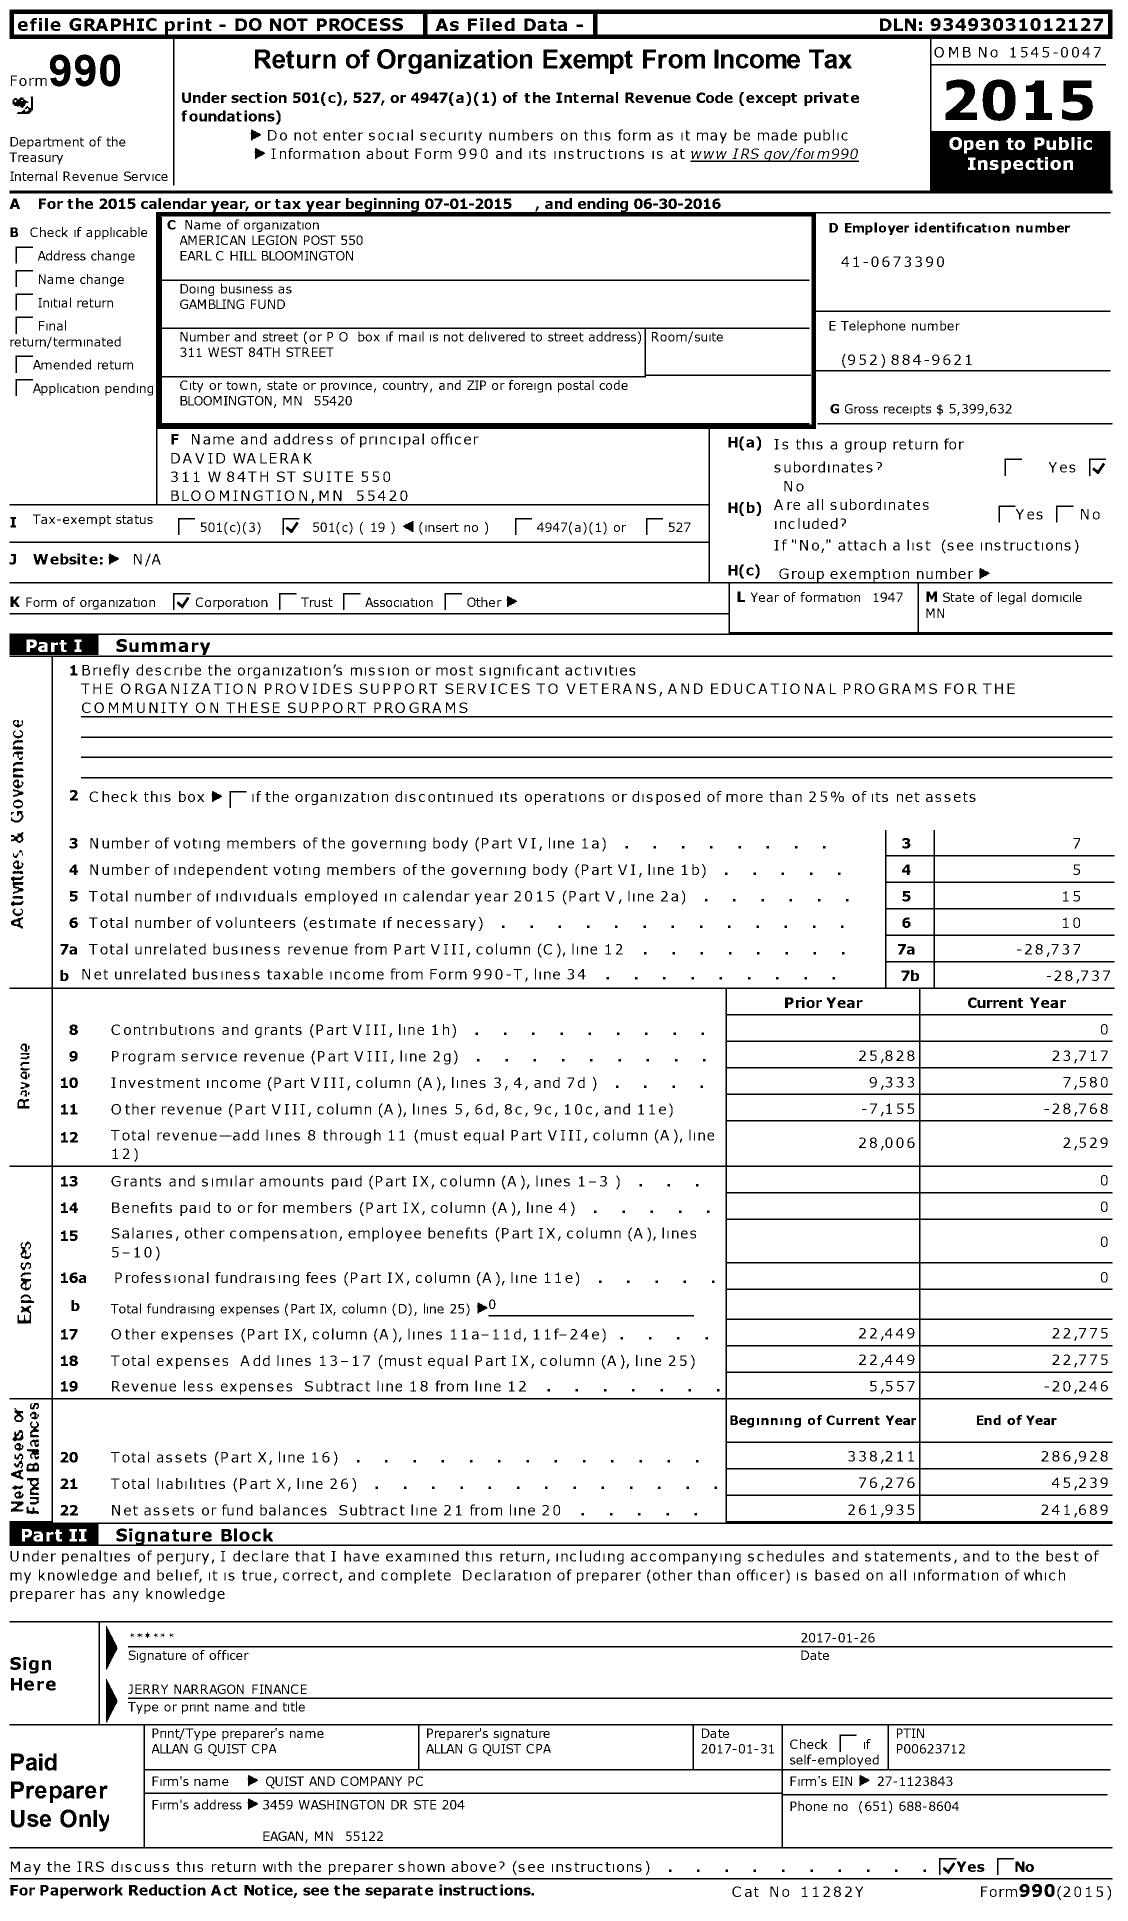 Image of first page of 2015 Form 990O for American Legion Post 550 Earl C Hill Bloomington